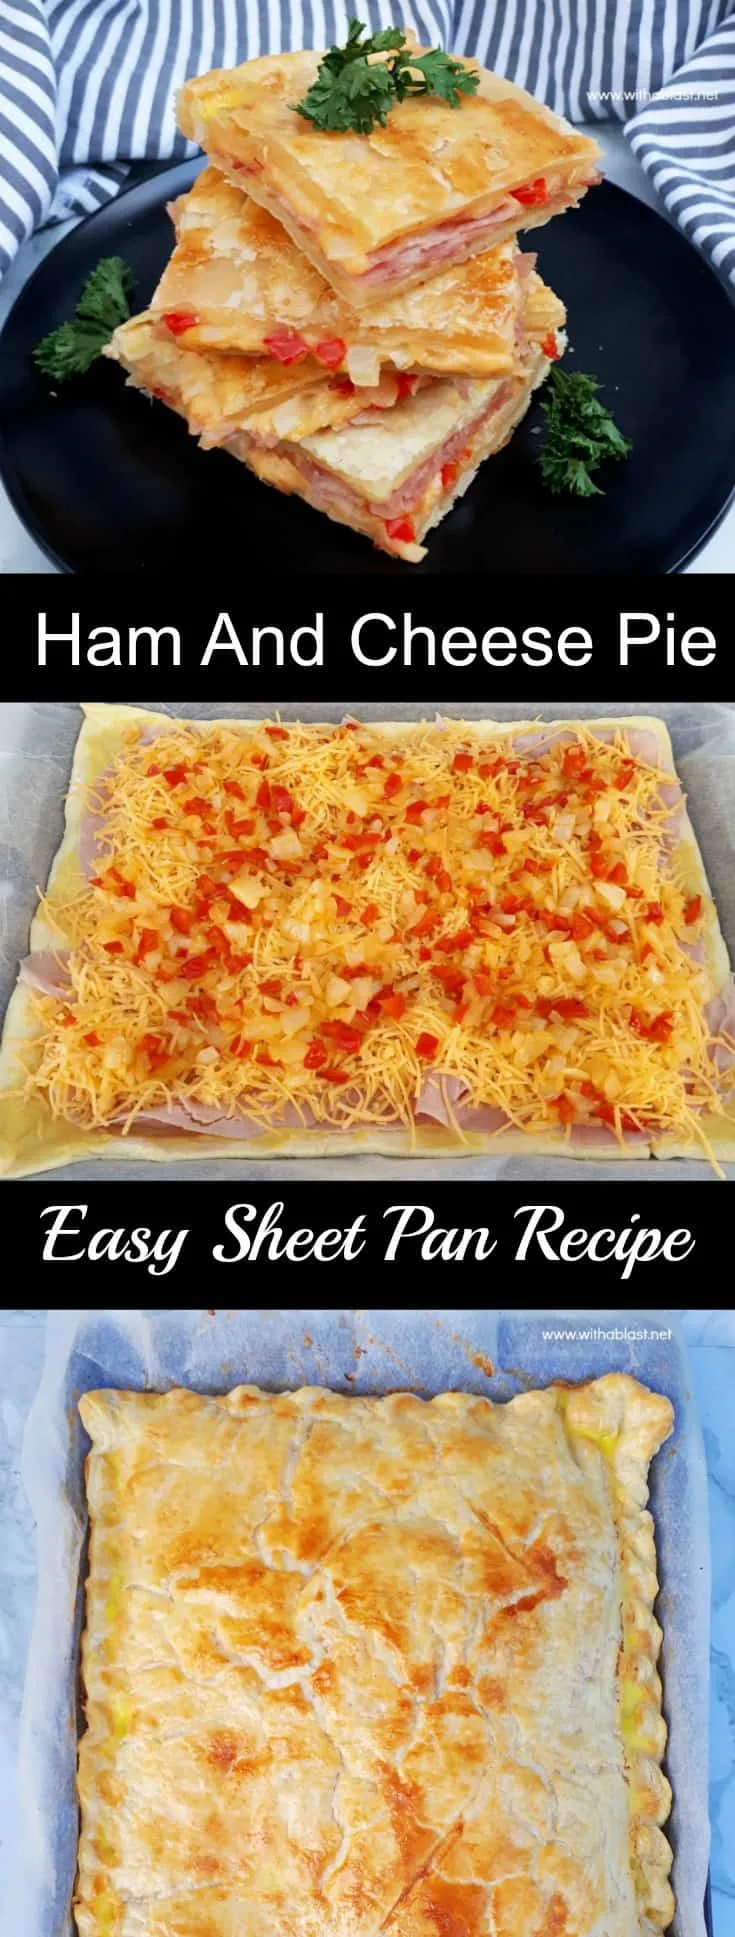 Ham and Cheese Pie is so quick and easy to make using a sheet pan and you can easily fit two pans into your oven - serve as a snack, breakfast or light dinner #SavoryPies #HamAndCheesePie #SheetPanRecipes #QuickAndEasyRecipes #SheetPanPie #SavoryPies